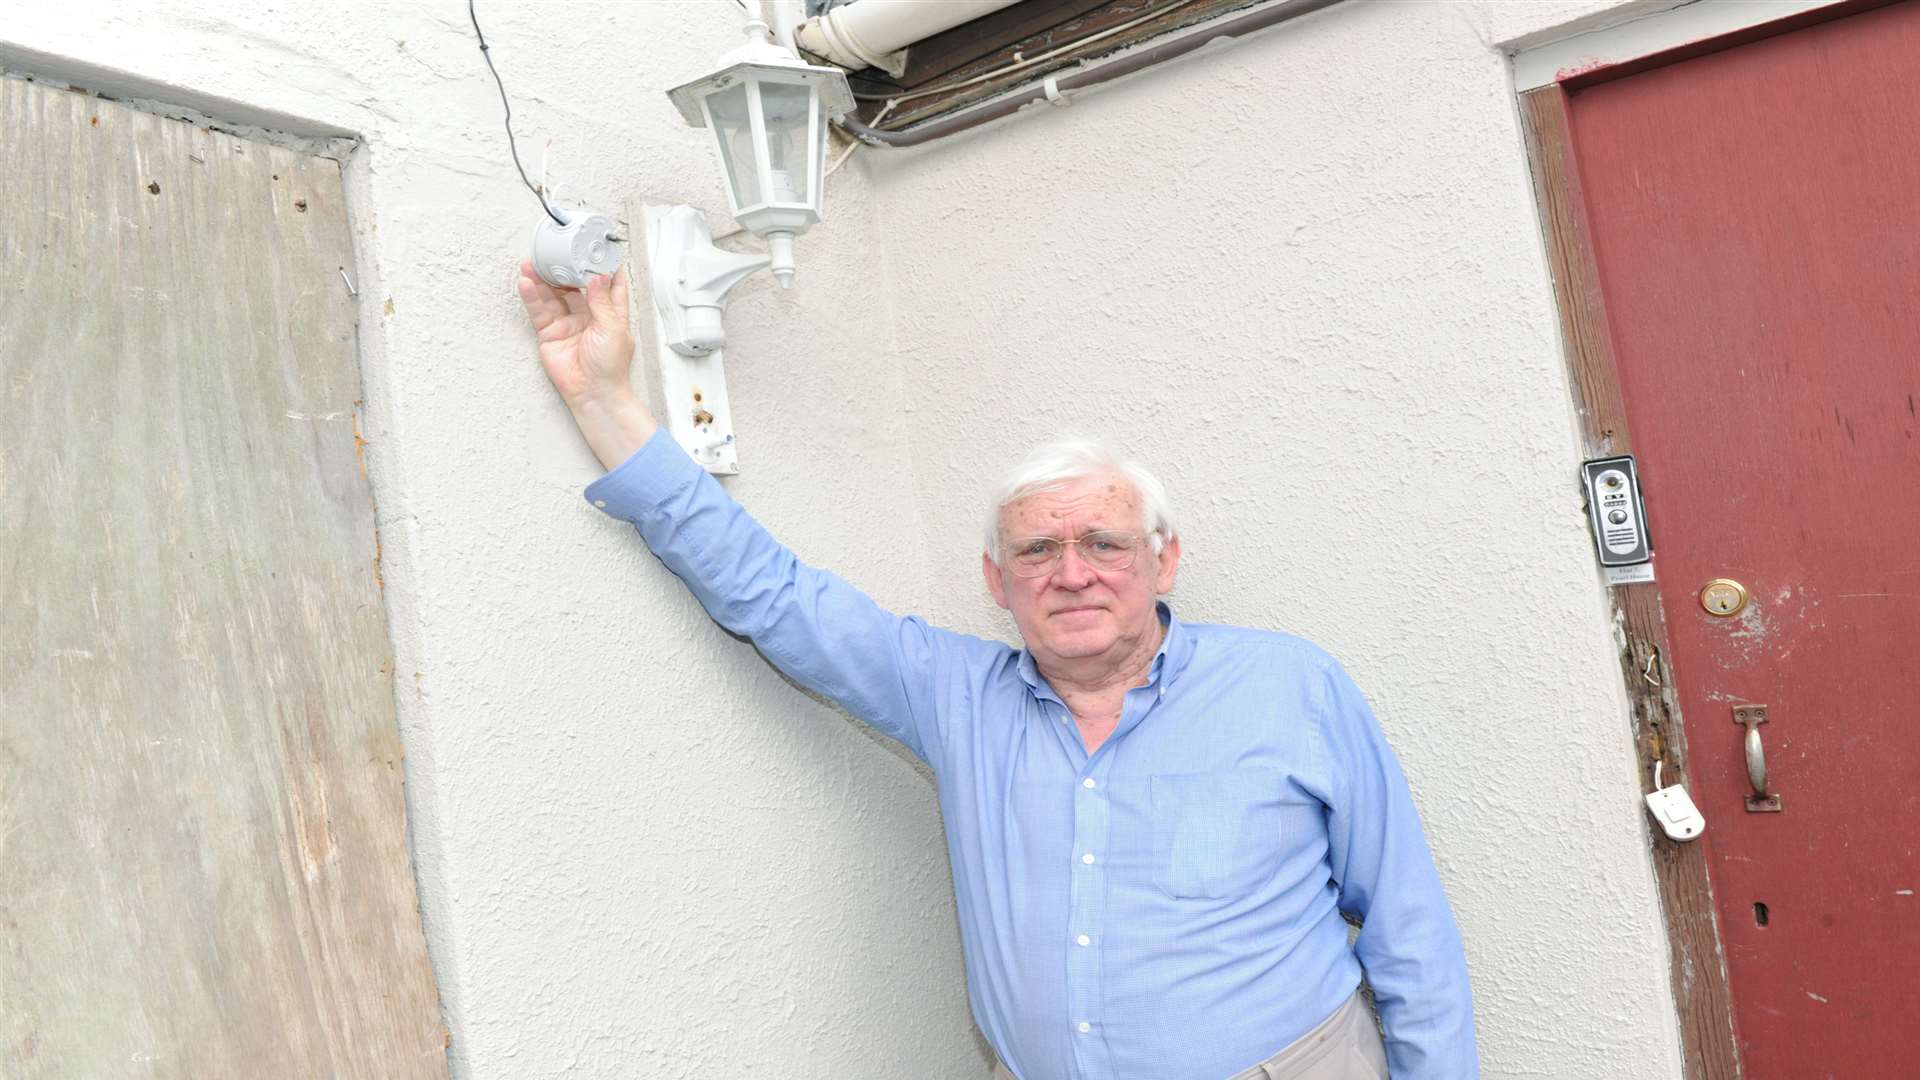 Sheerness resident Peter Apps had CCTV cameras stolen from outside his house.